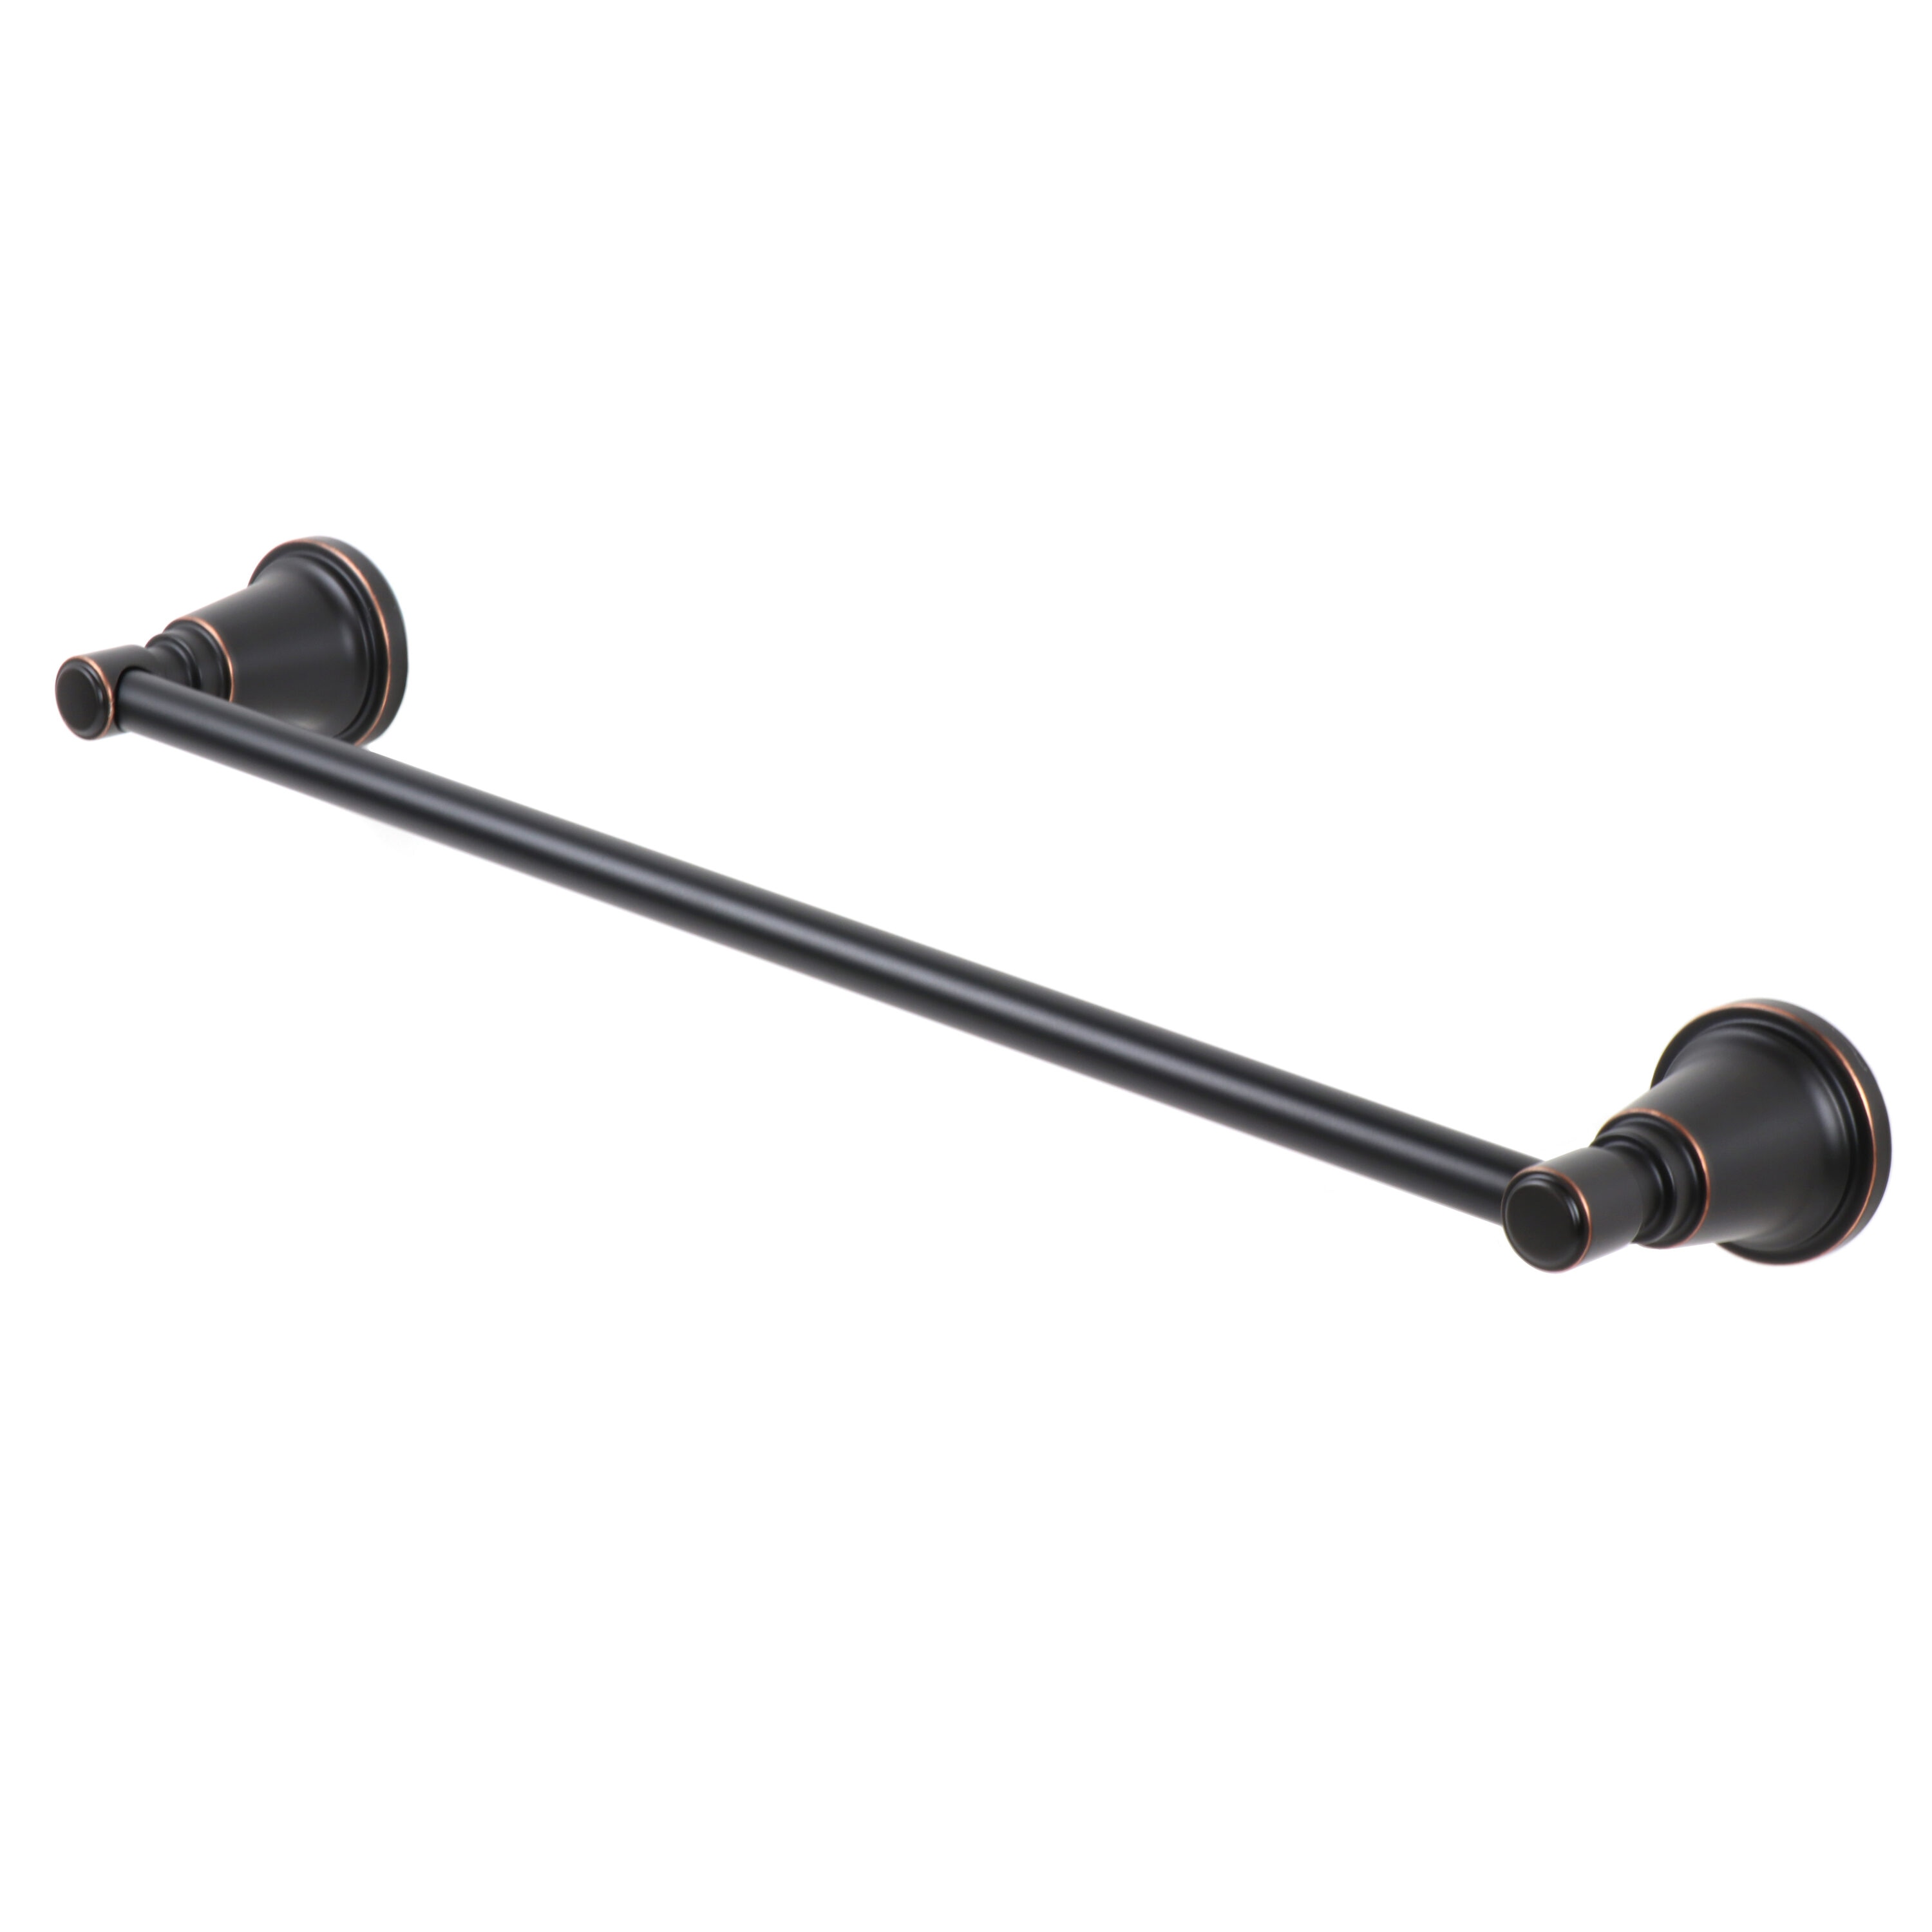 allen + roth Harlow 18-in Gold Wall Mount Single Towel Bar in the